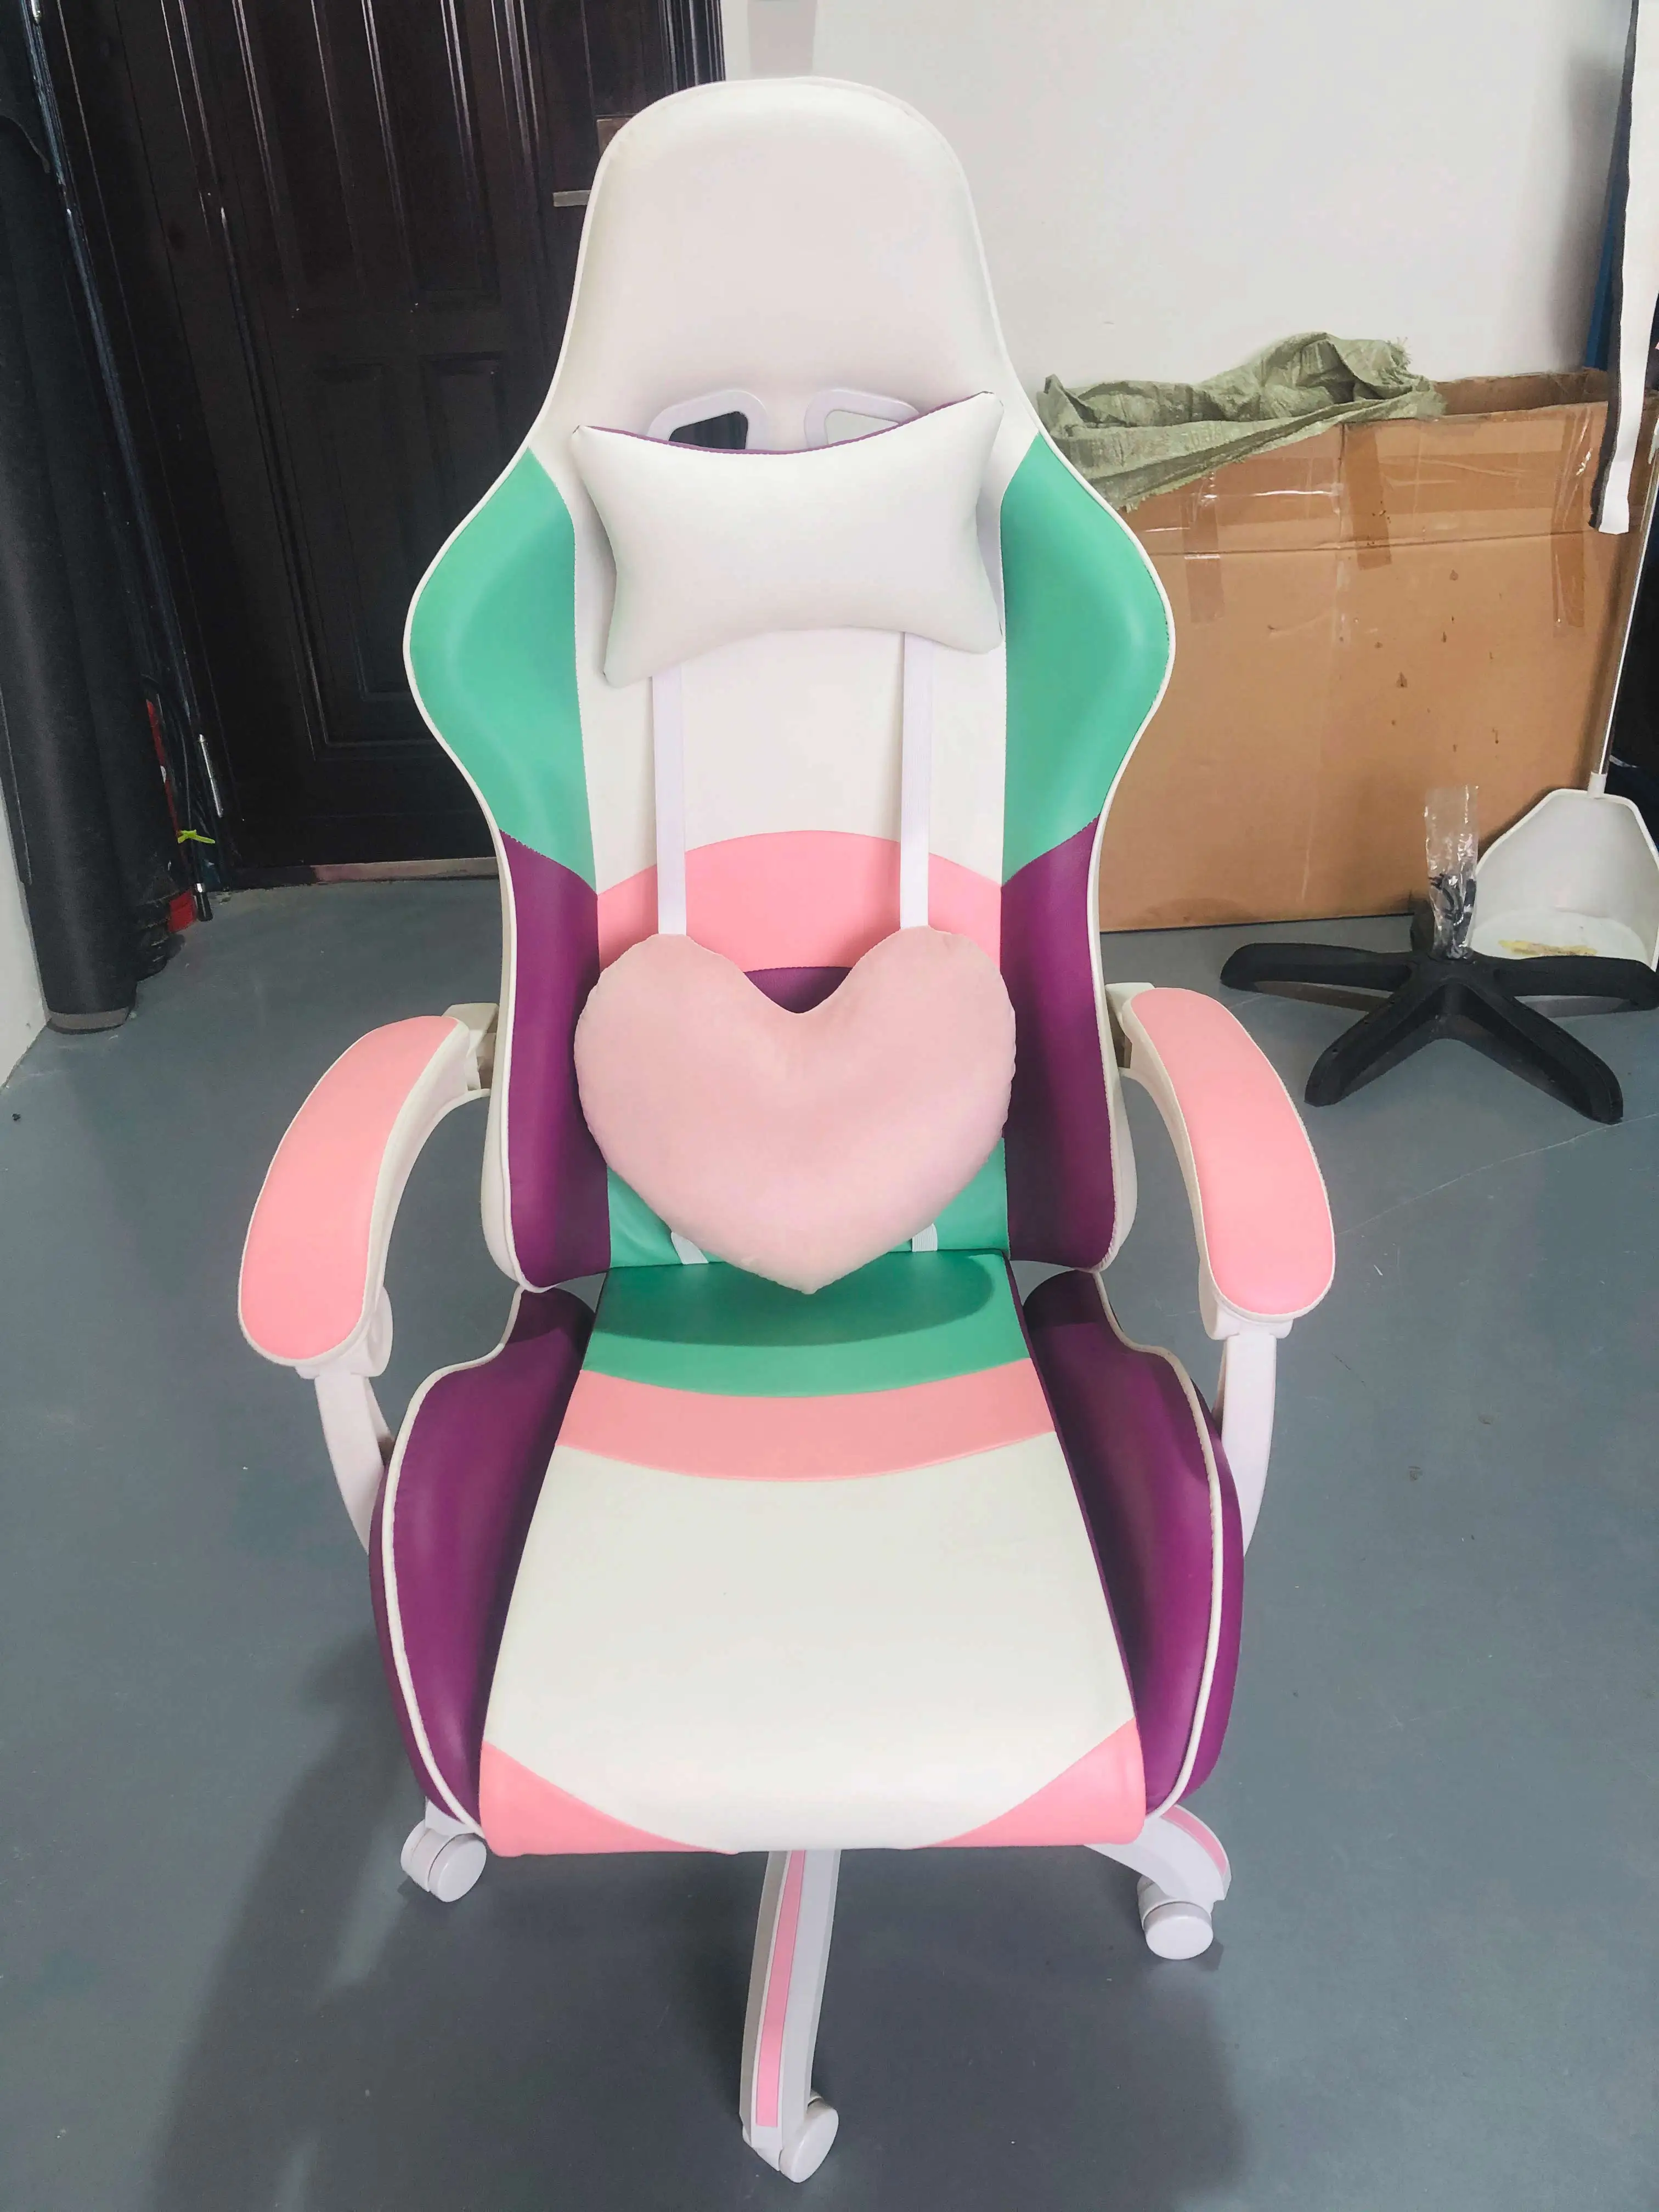 2021 NEW RGB lights game chair Commercial Furniture chair Conference Recline armrests office chair